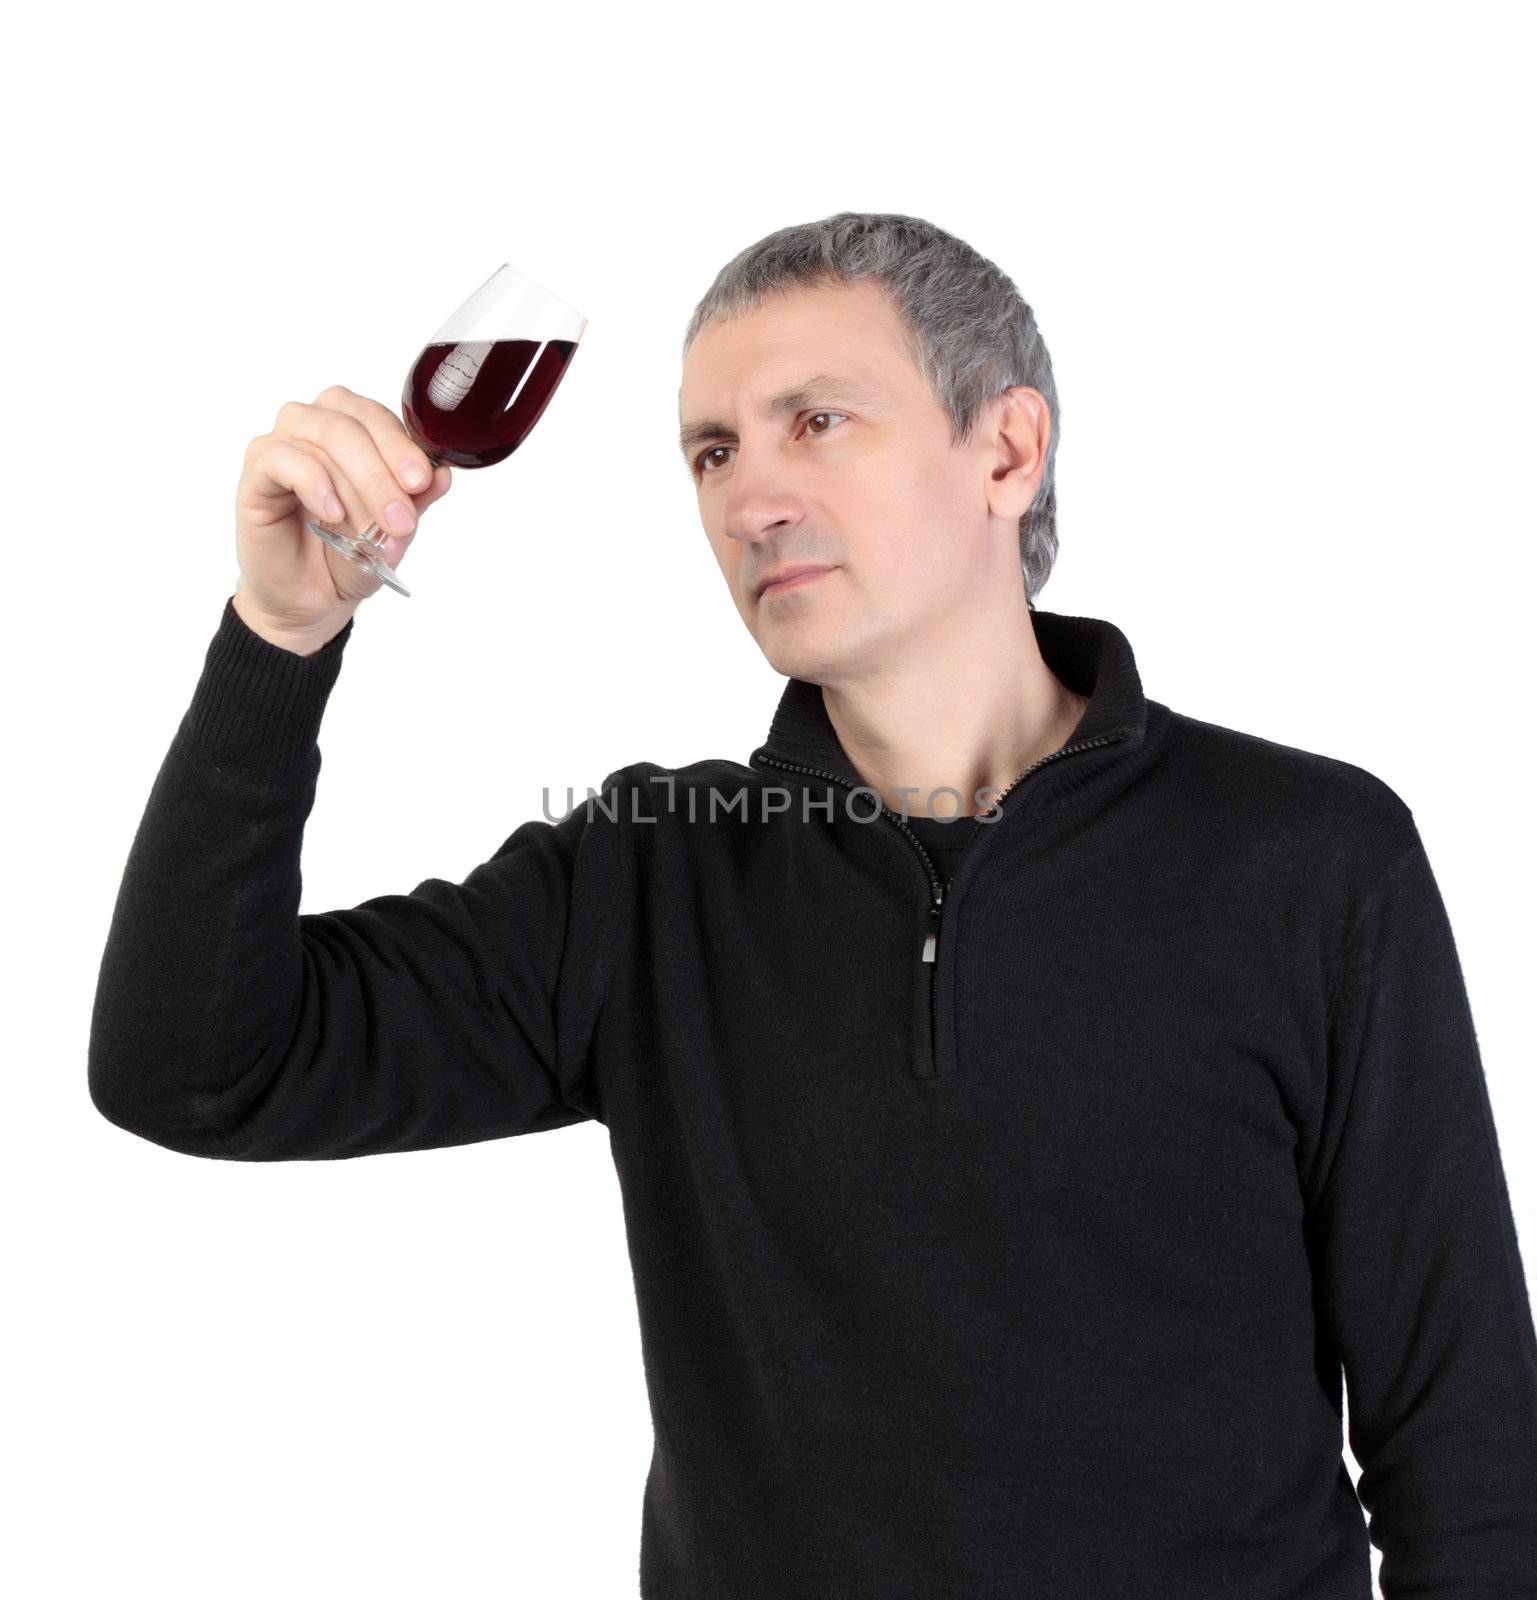 Man holding a glass of red port wine, on white background